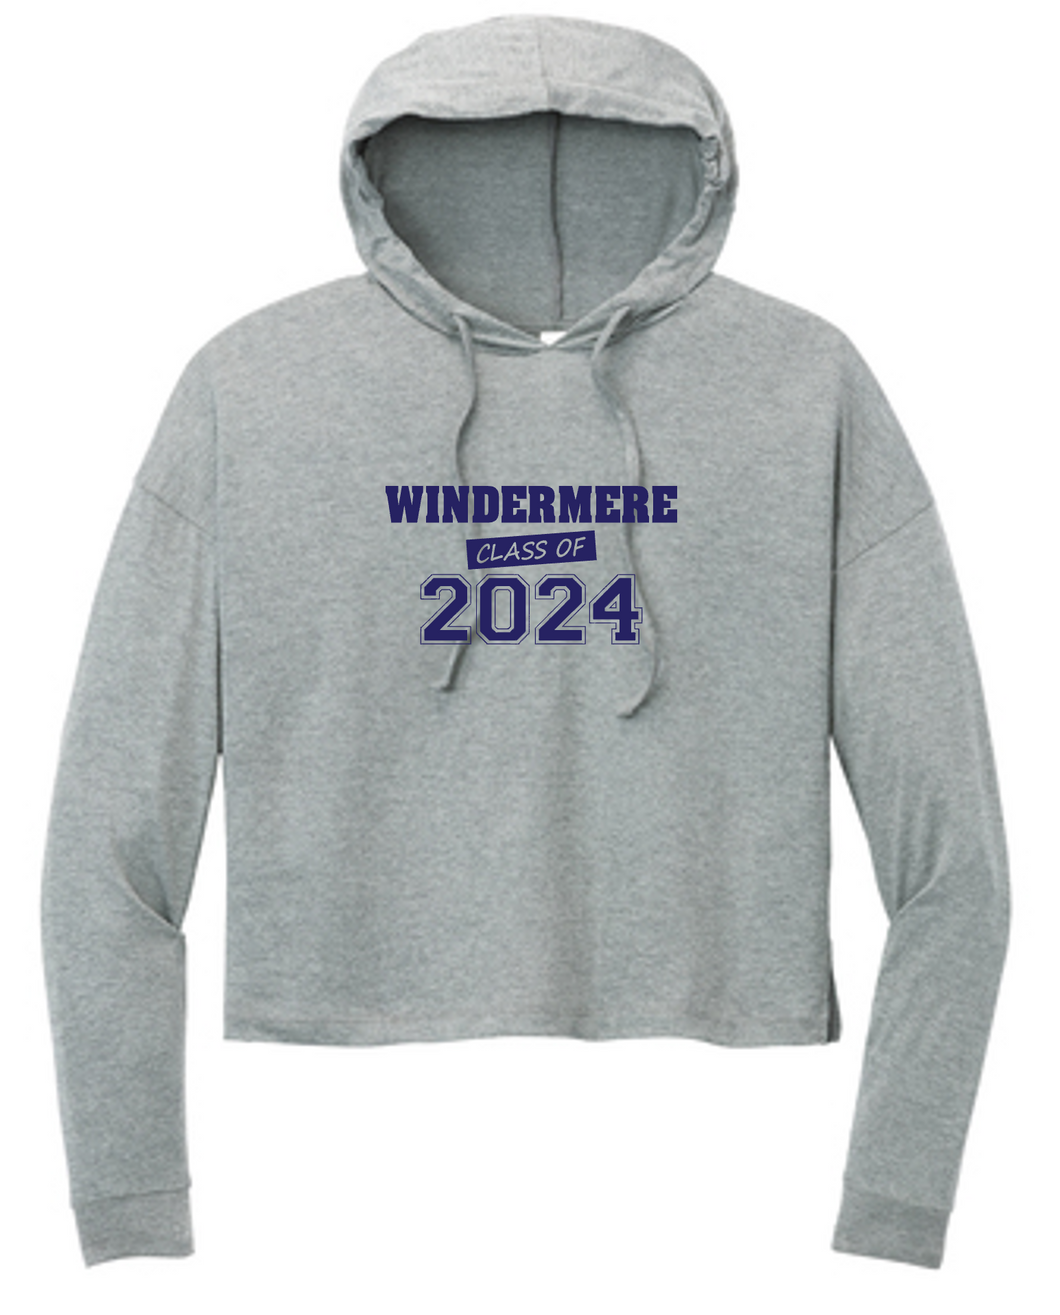 District® Women’s Perfect Tri® Midi Long Sleeve Hoodie - Windermere Class of 2024